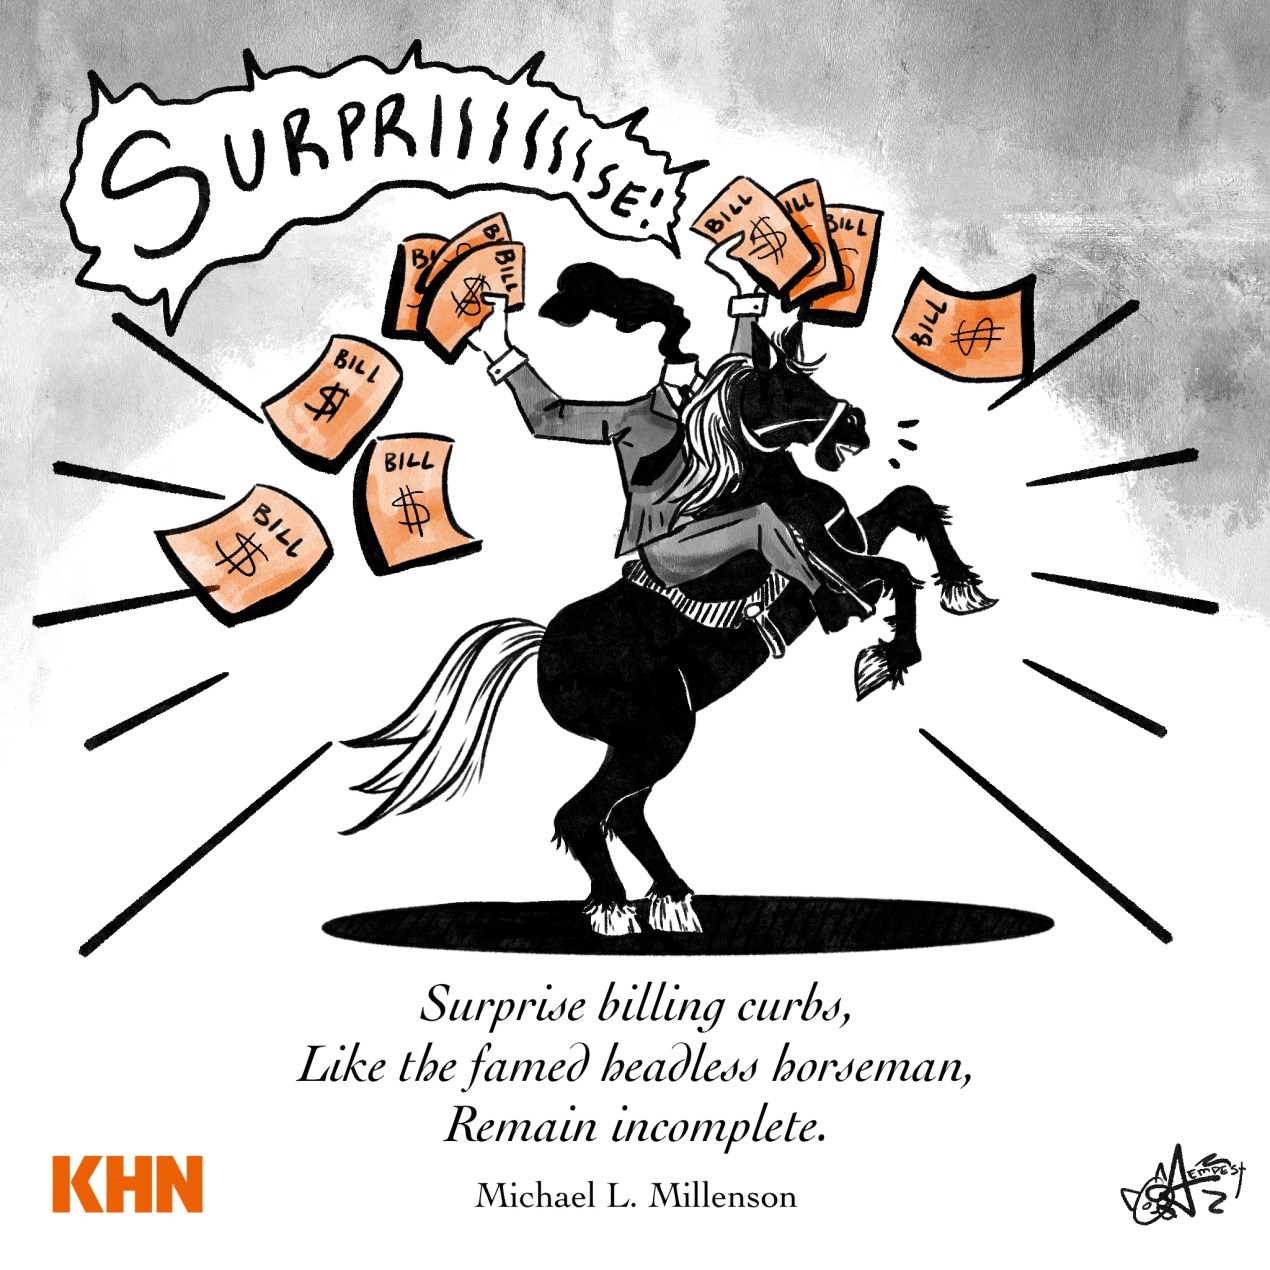 A pen and ink cartoon depicting the mythical headless horseman wearing a business suit and scattering surprise medical bills.